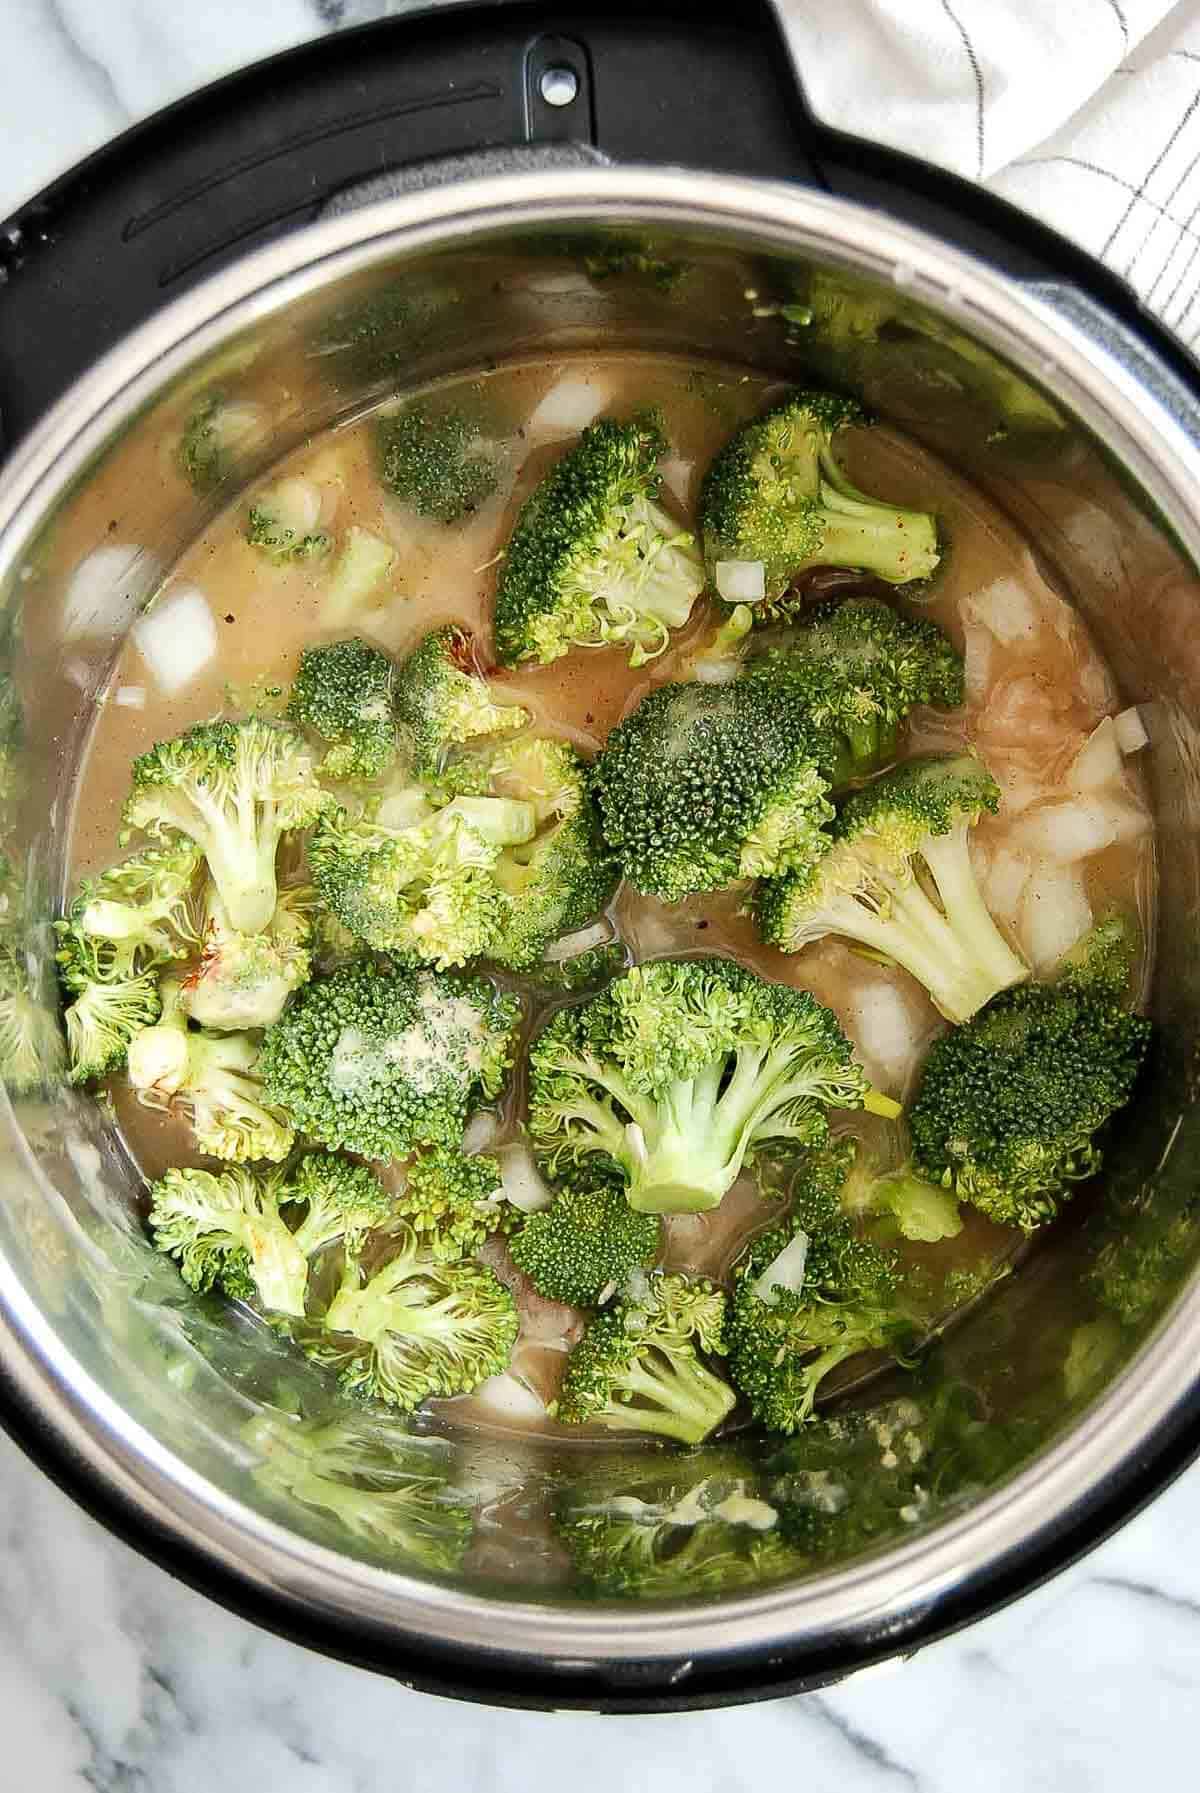 ingredients for chicken broccoli and rice casserole in crock pot.